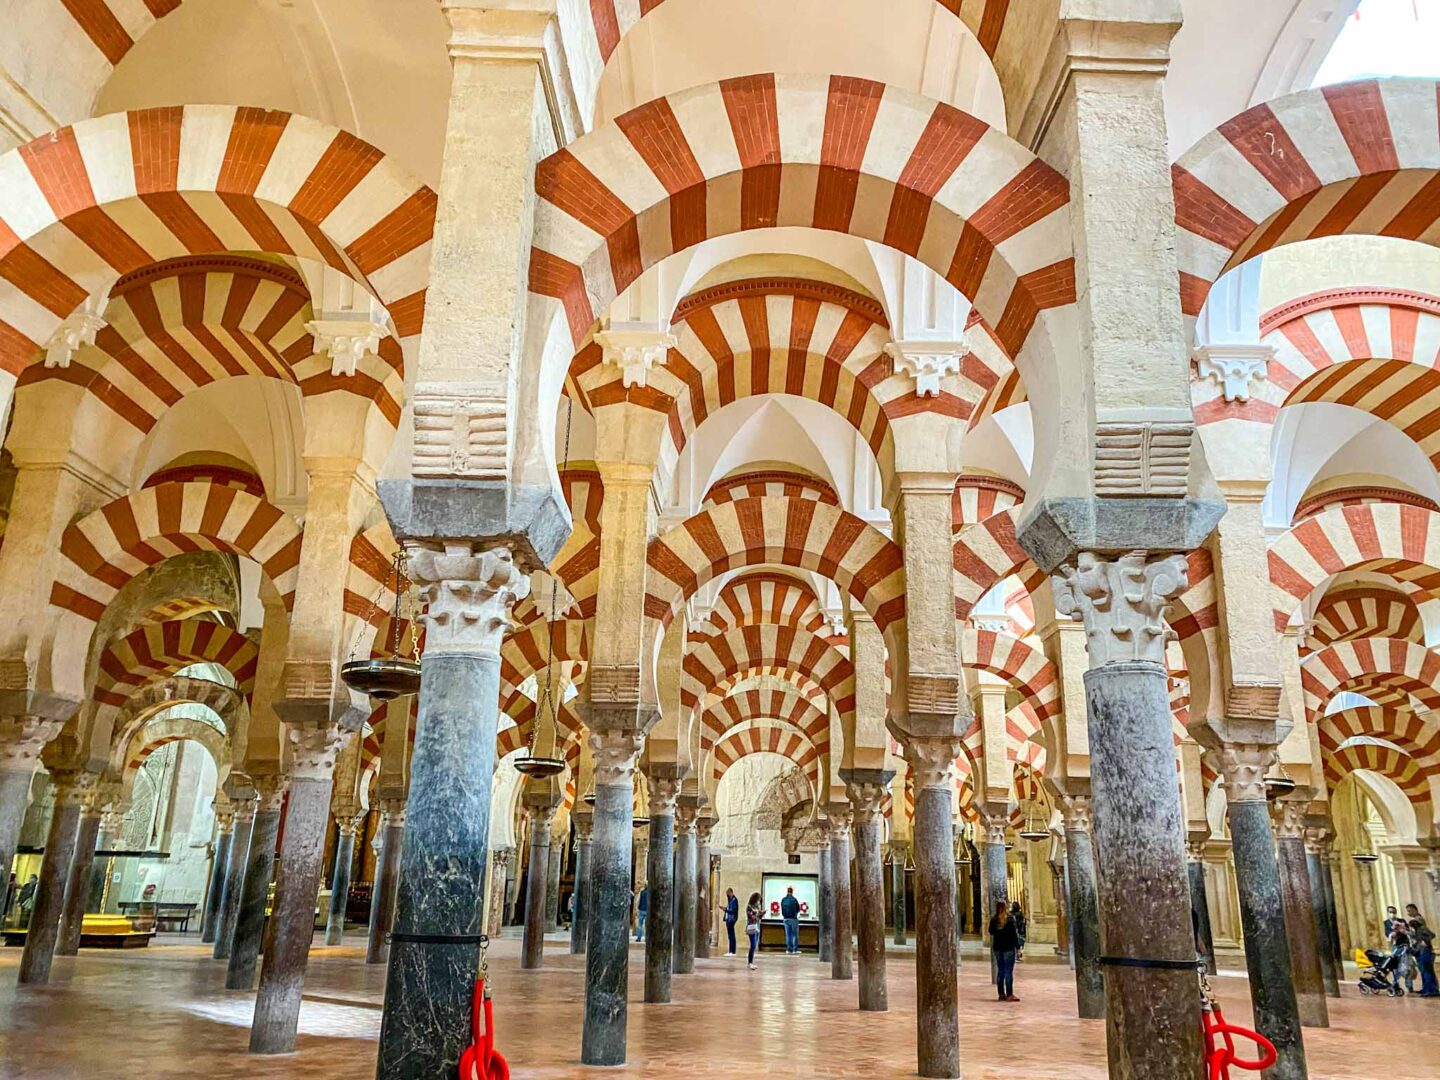 The Wandering Quinn Travel Blog travel tips for Muslim Women, Cordoba Mosque Cathedral in Spain